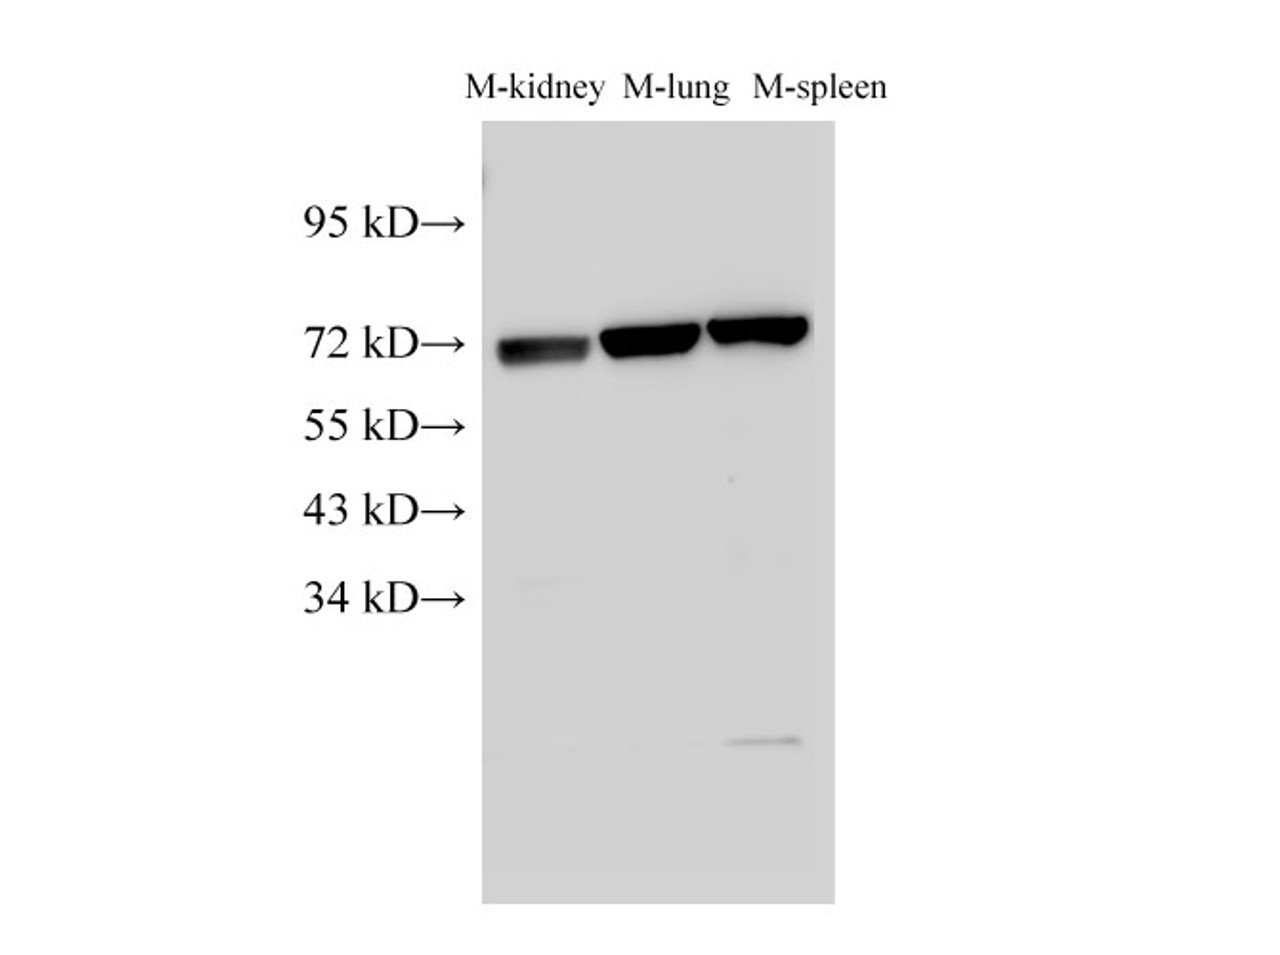 Western Blot analysis of Mouse kidney, Mouse lung and Mouse spleen using Lamin B1 Polyclonal Antibody at dilution of 1:1000